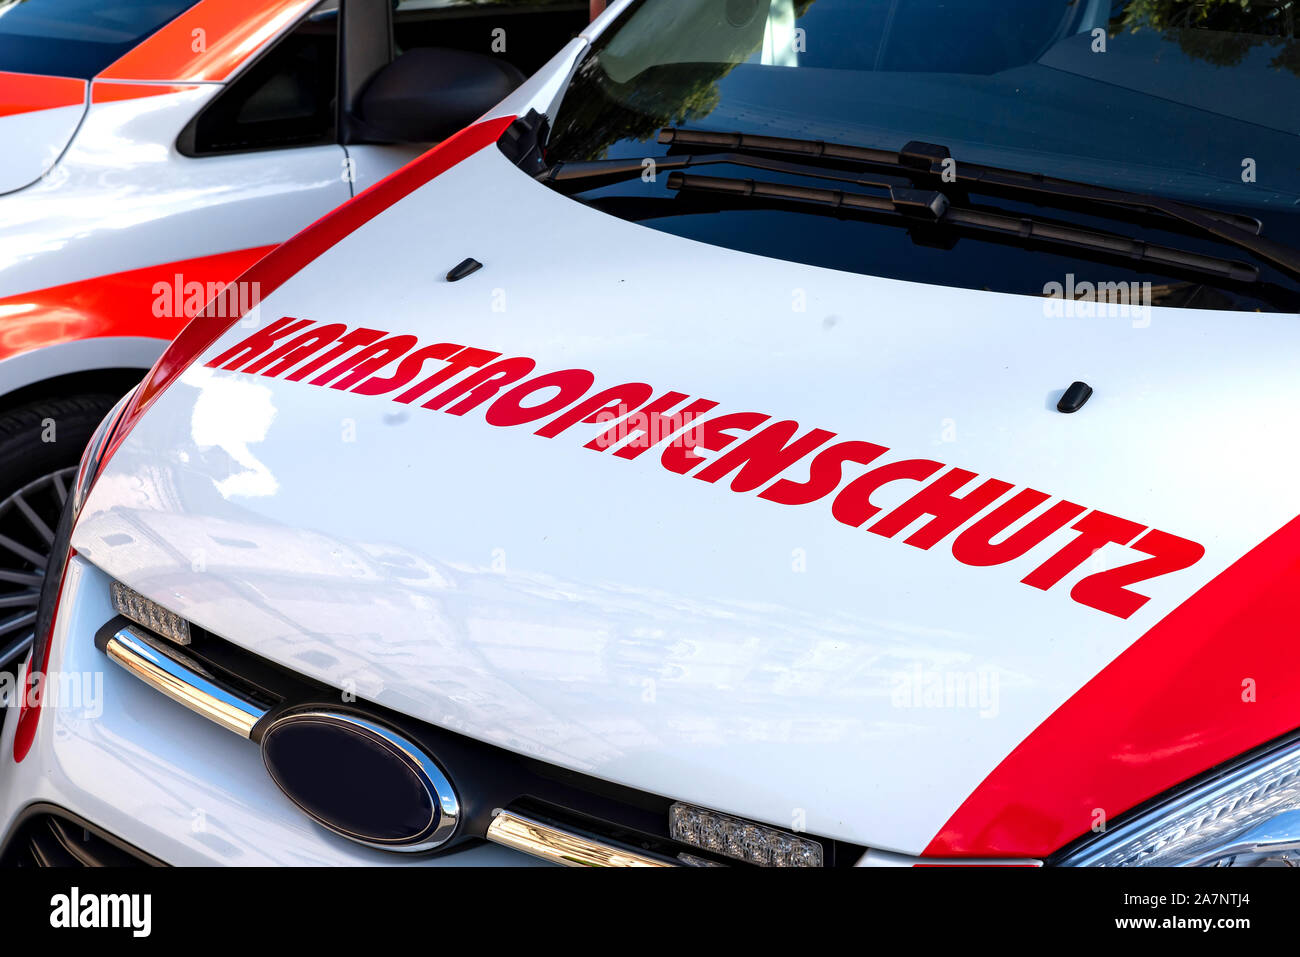 Emergency vehicle with the inscription disaster protection – Katastrophenschutz Stock Photo